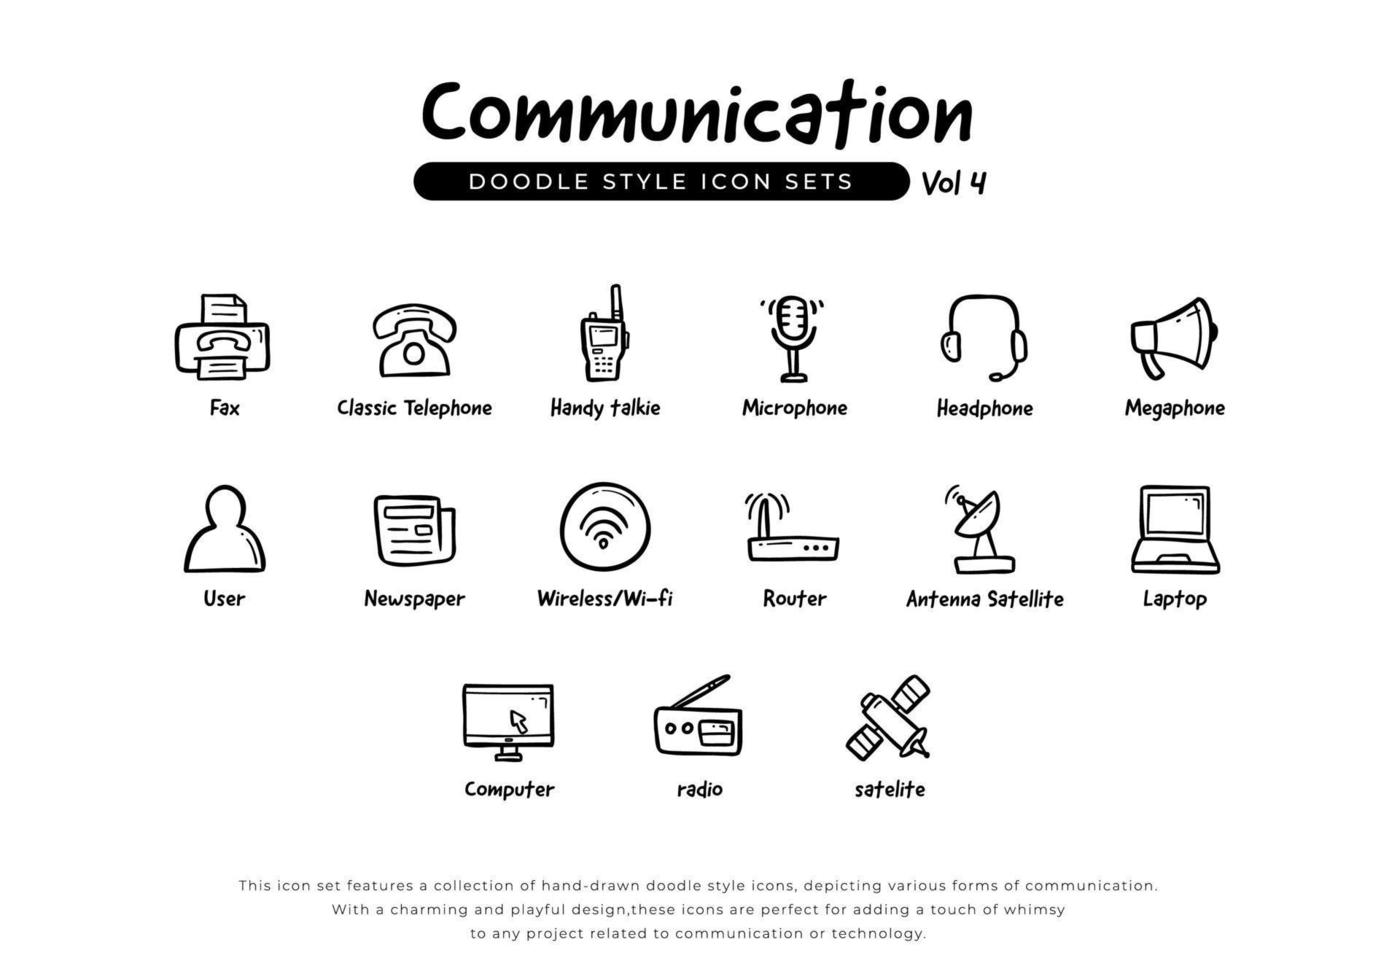 communication and gadget icon set in doodle style drawing include fax, telephone, handy talkie, microphone, headphone, megaphone,  radio, satellite and more vector